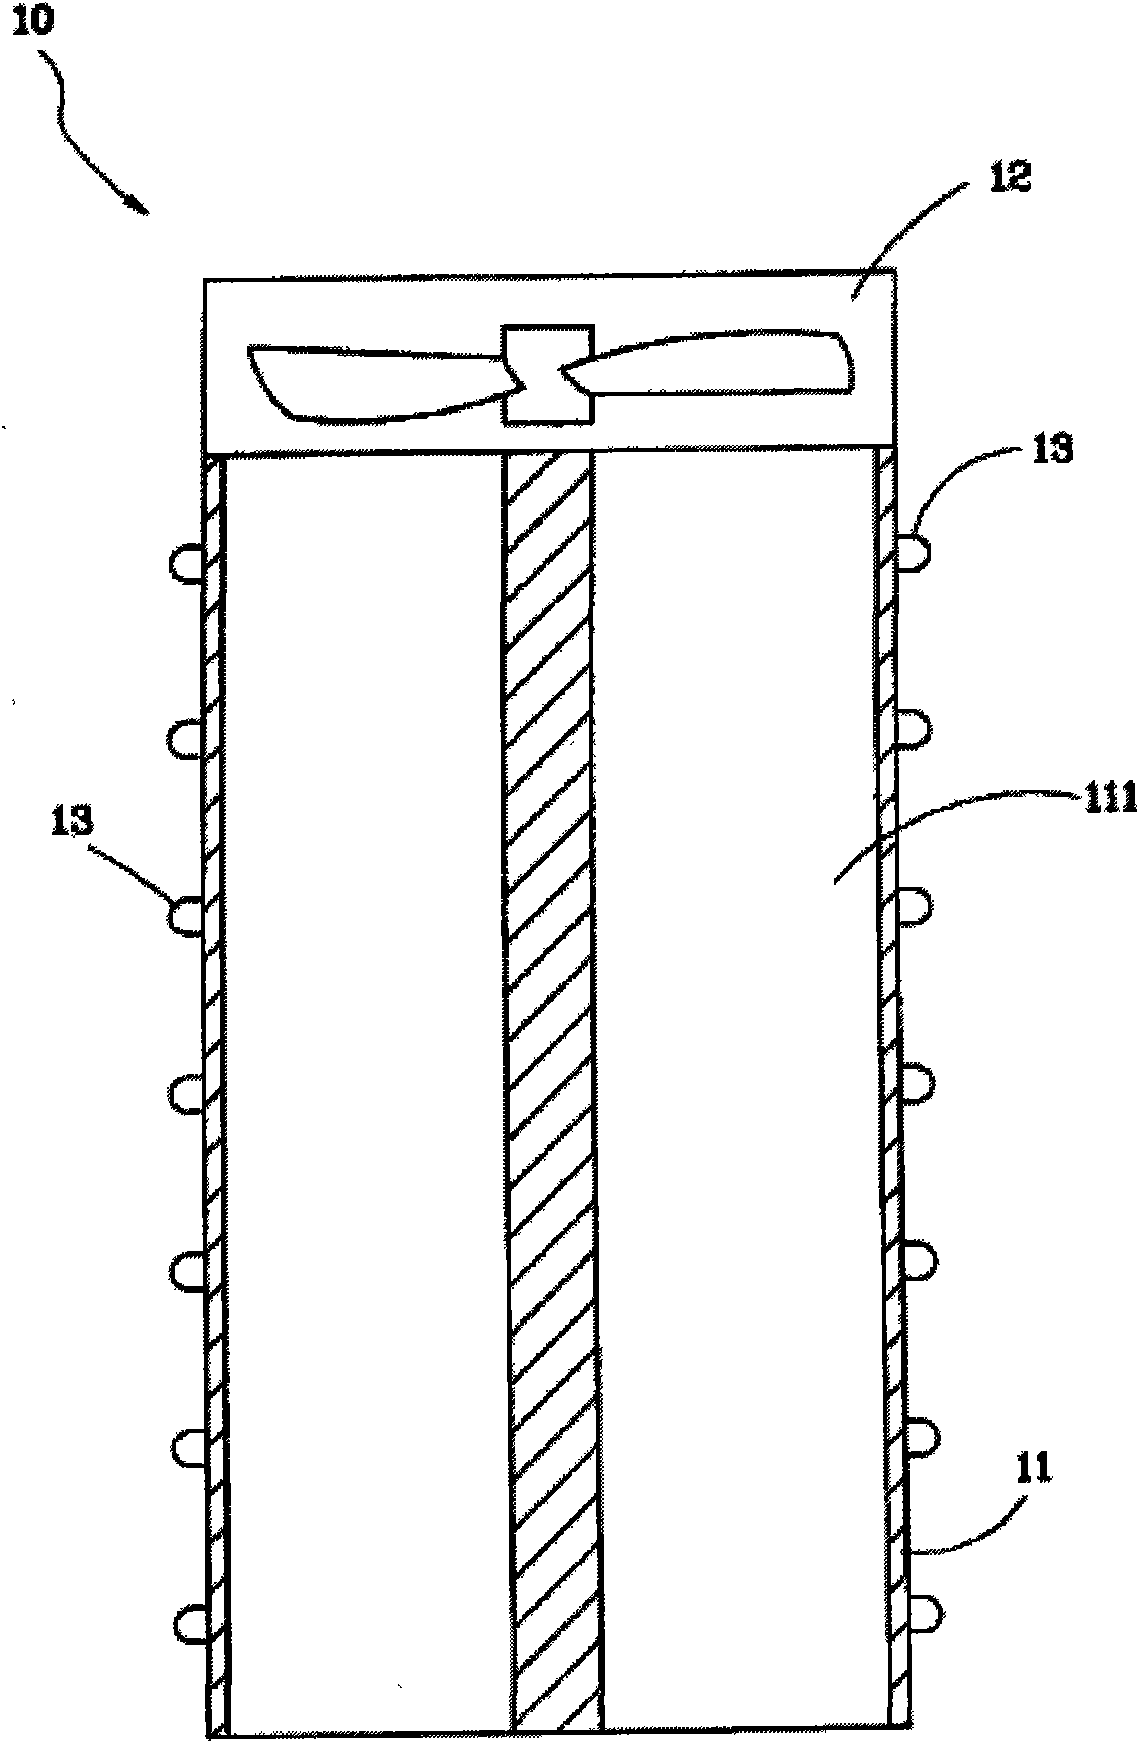 Light emitting diode lamp with radiating structure